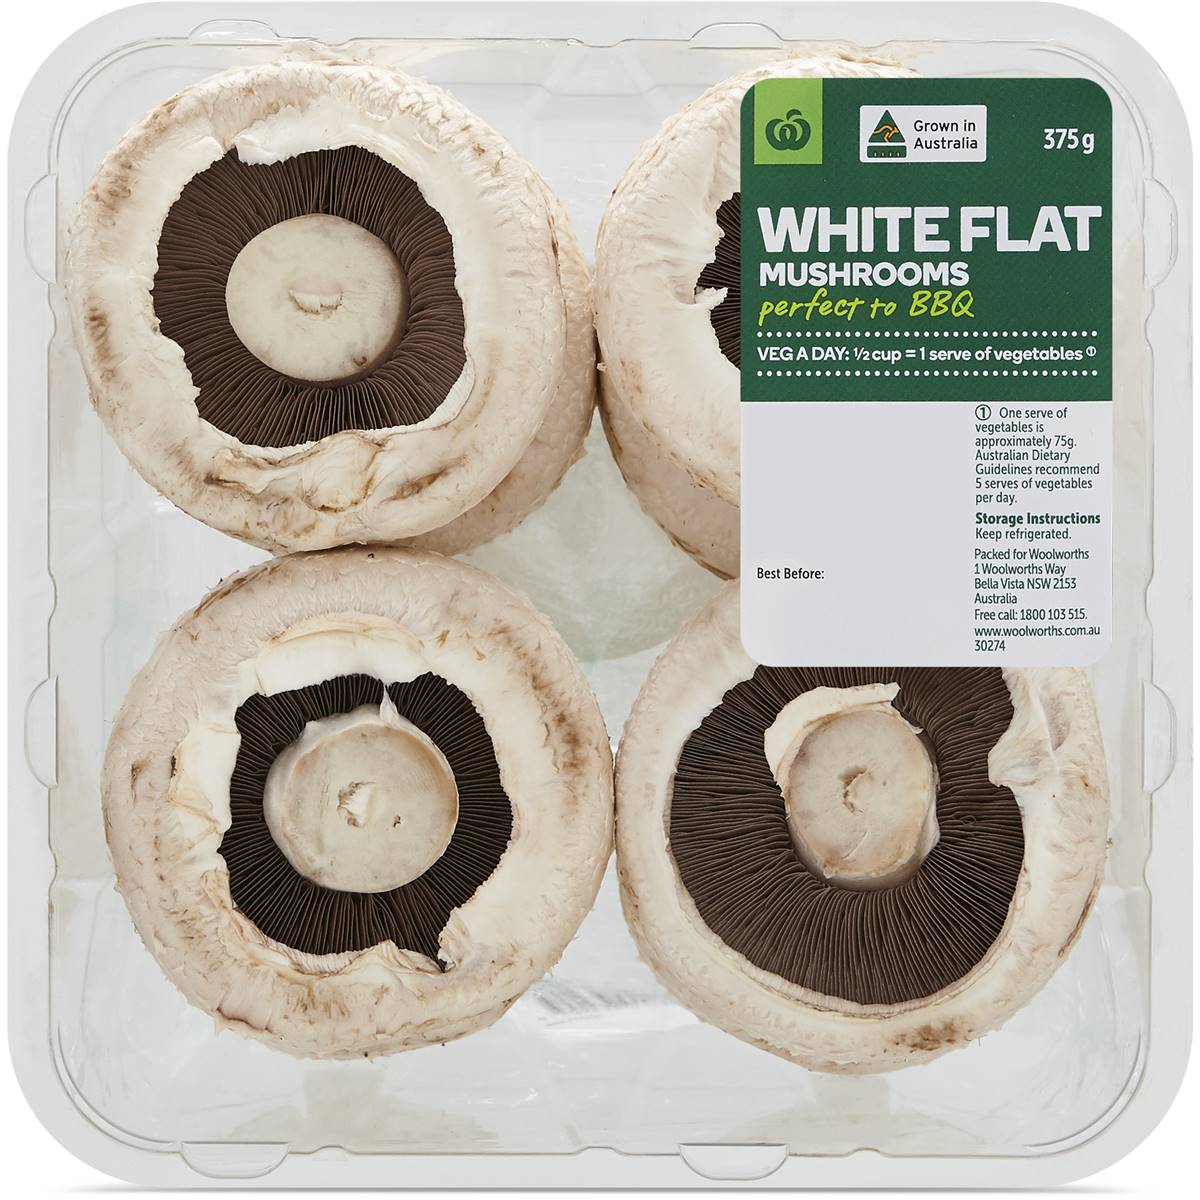 Calories in Woolworths White Flat Mushrooms Punnet